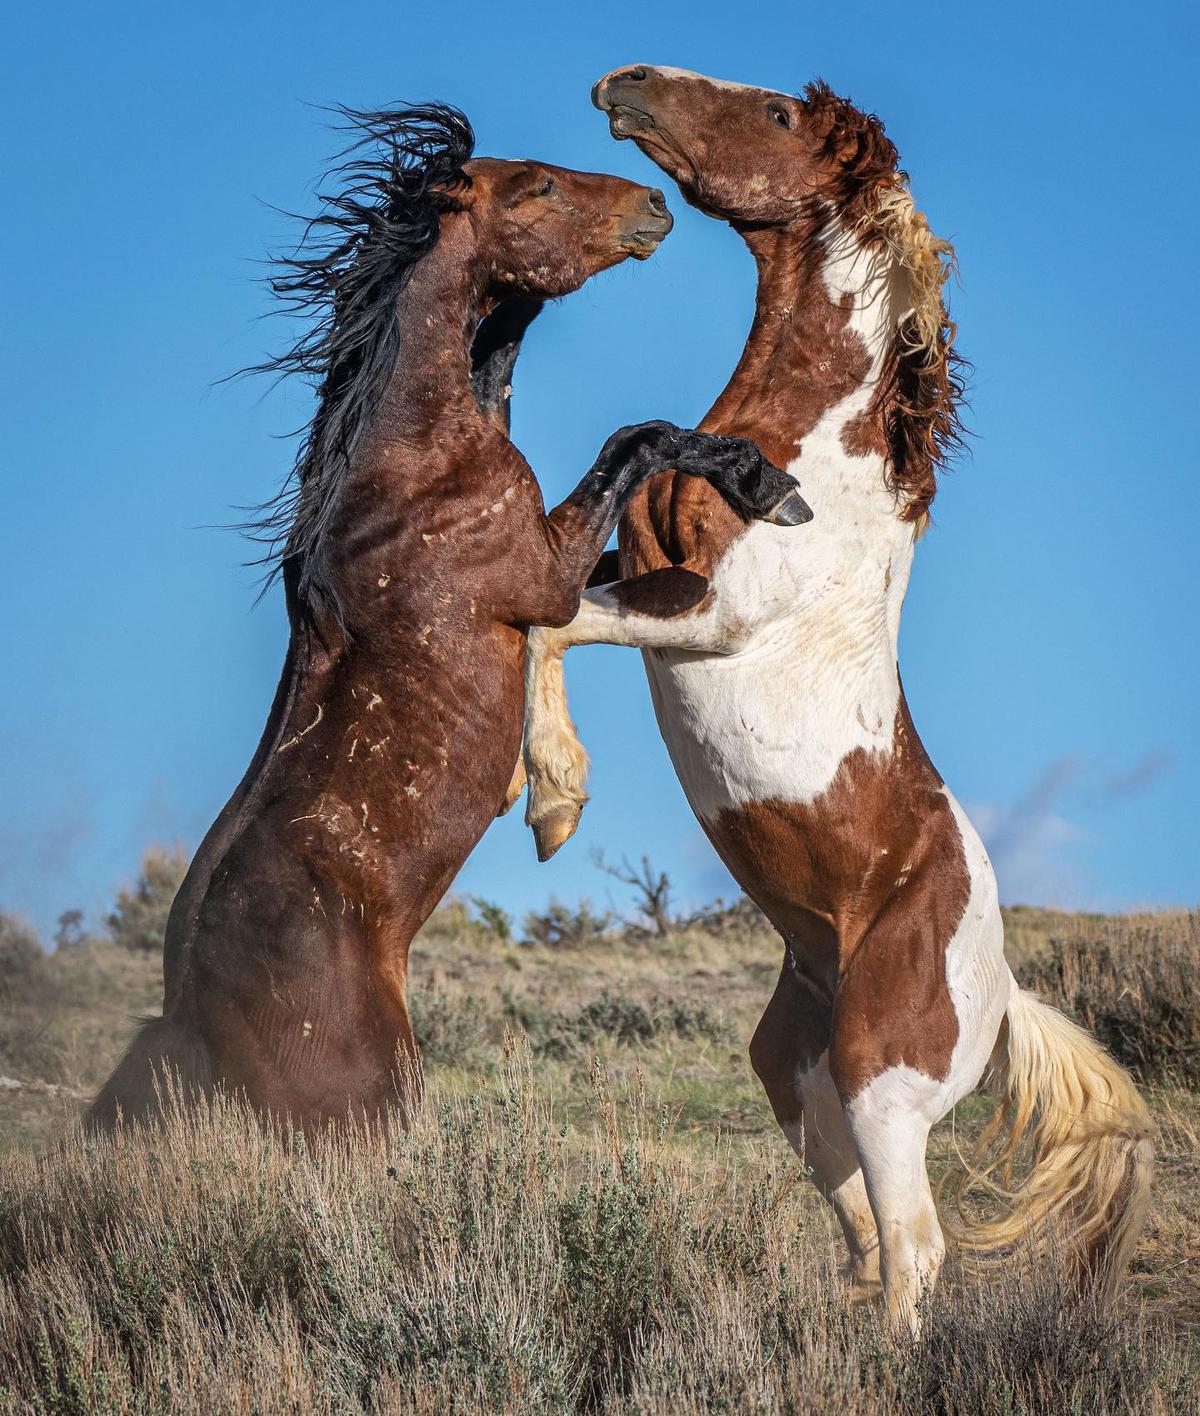 McCullough Peaks stallions show off their muscular agility as they spar with one another. (Courtesy of <a href="https://www.instagram.com/swgoudge/">Susan Goudge</a>)